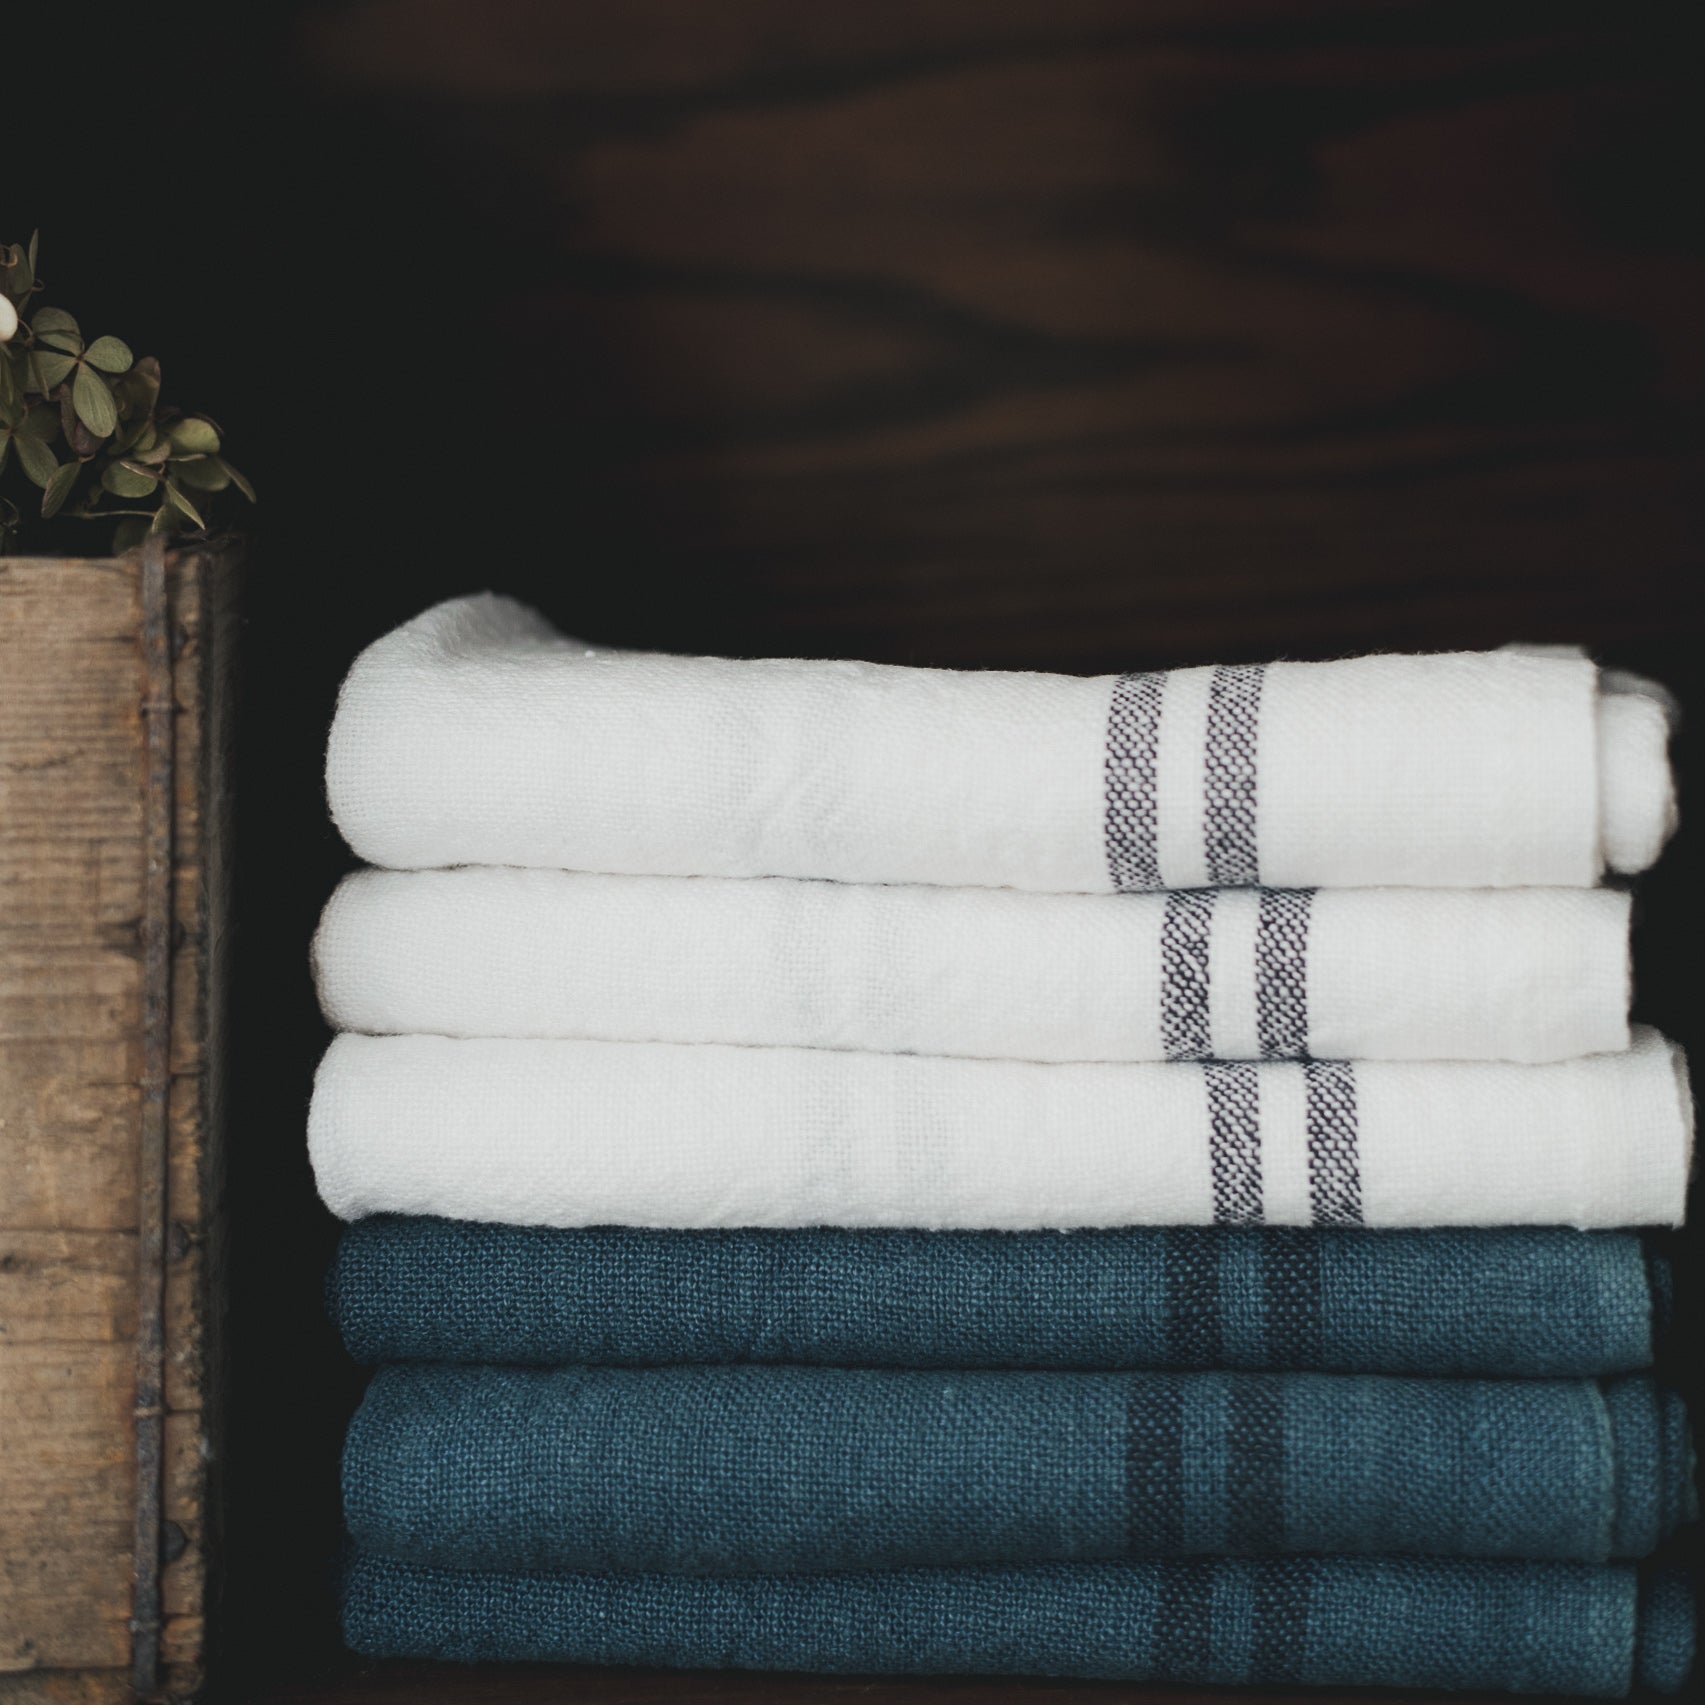 These 100% authentic natural French linen kitchen towels are delightfully stunning and make for the perfect kitchen and chef companion. 